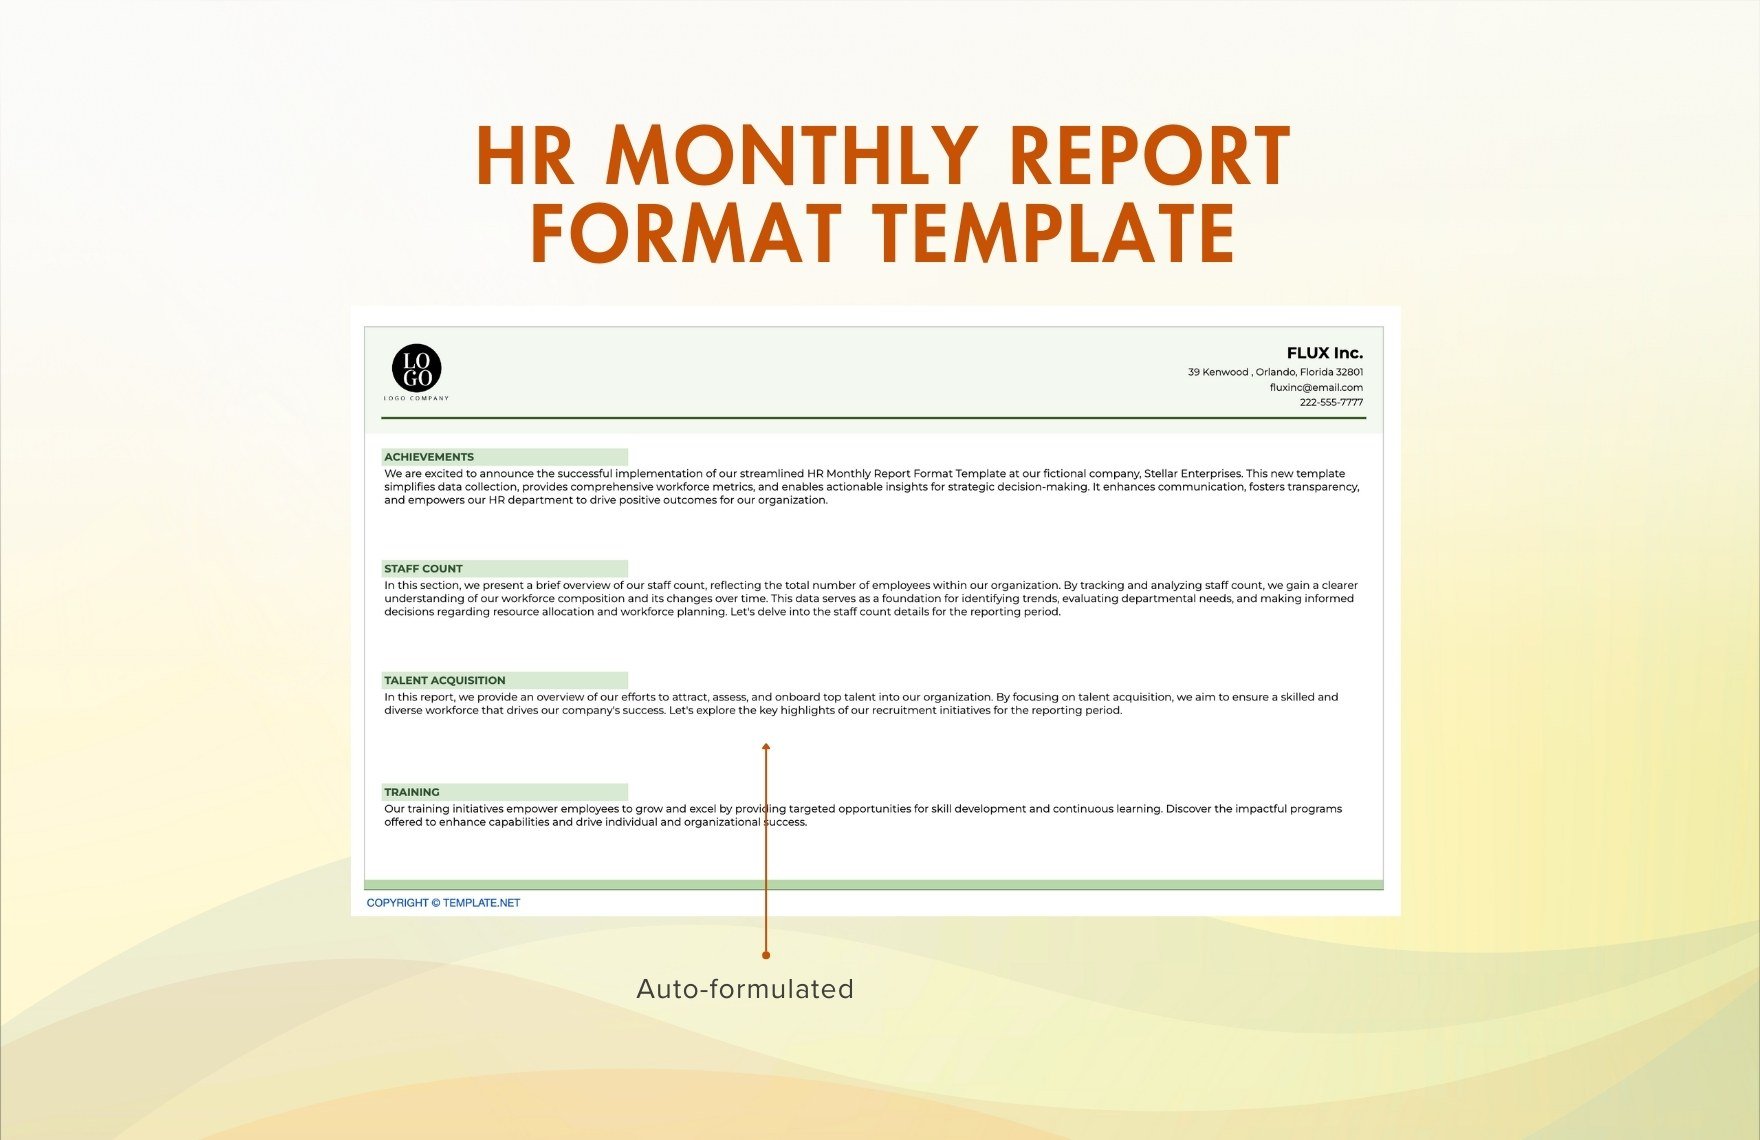 HR Monthly Report Format Template